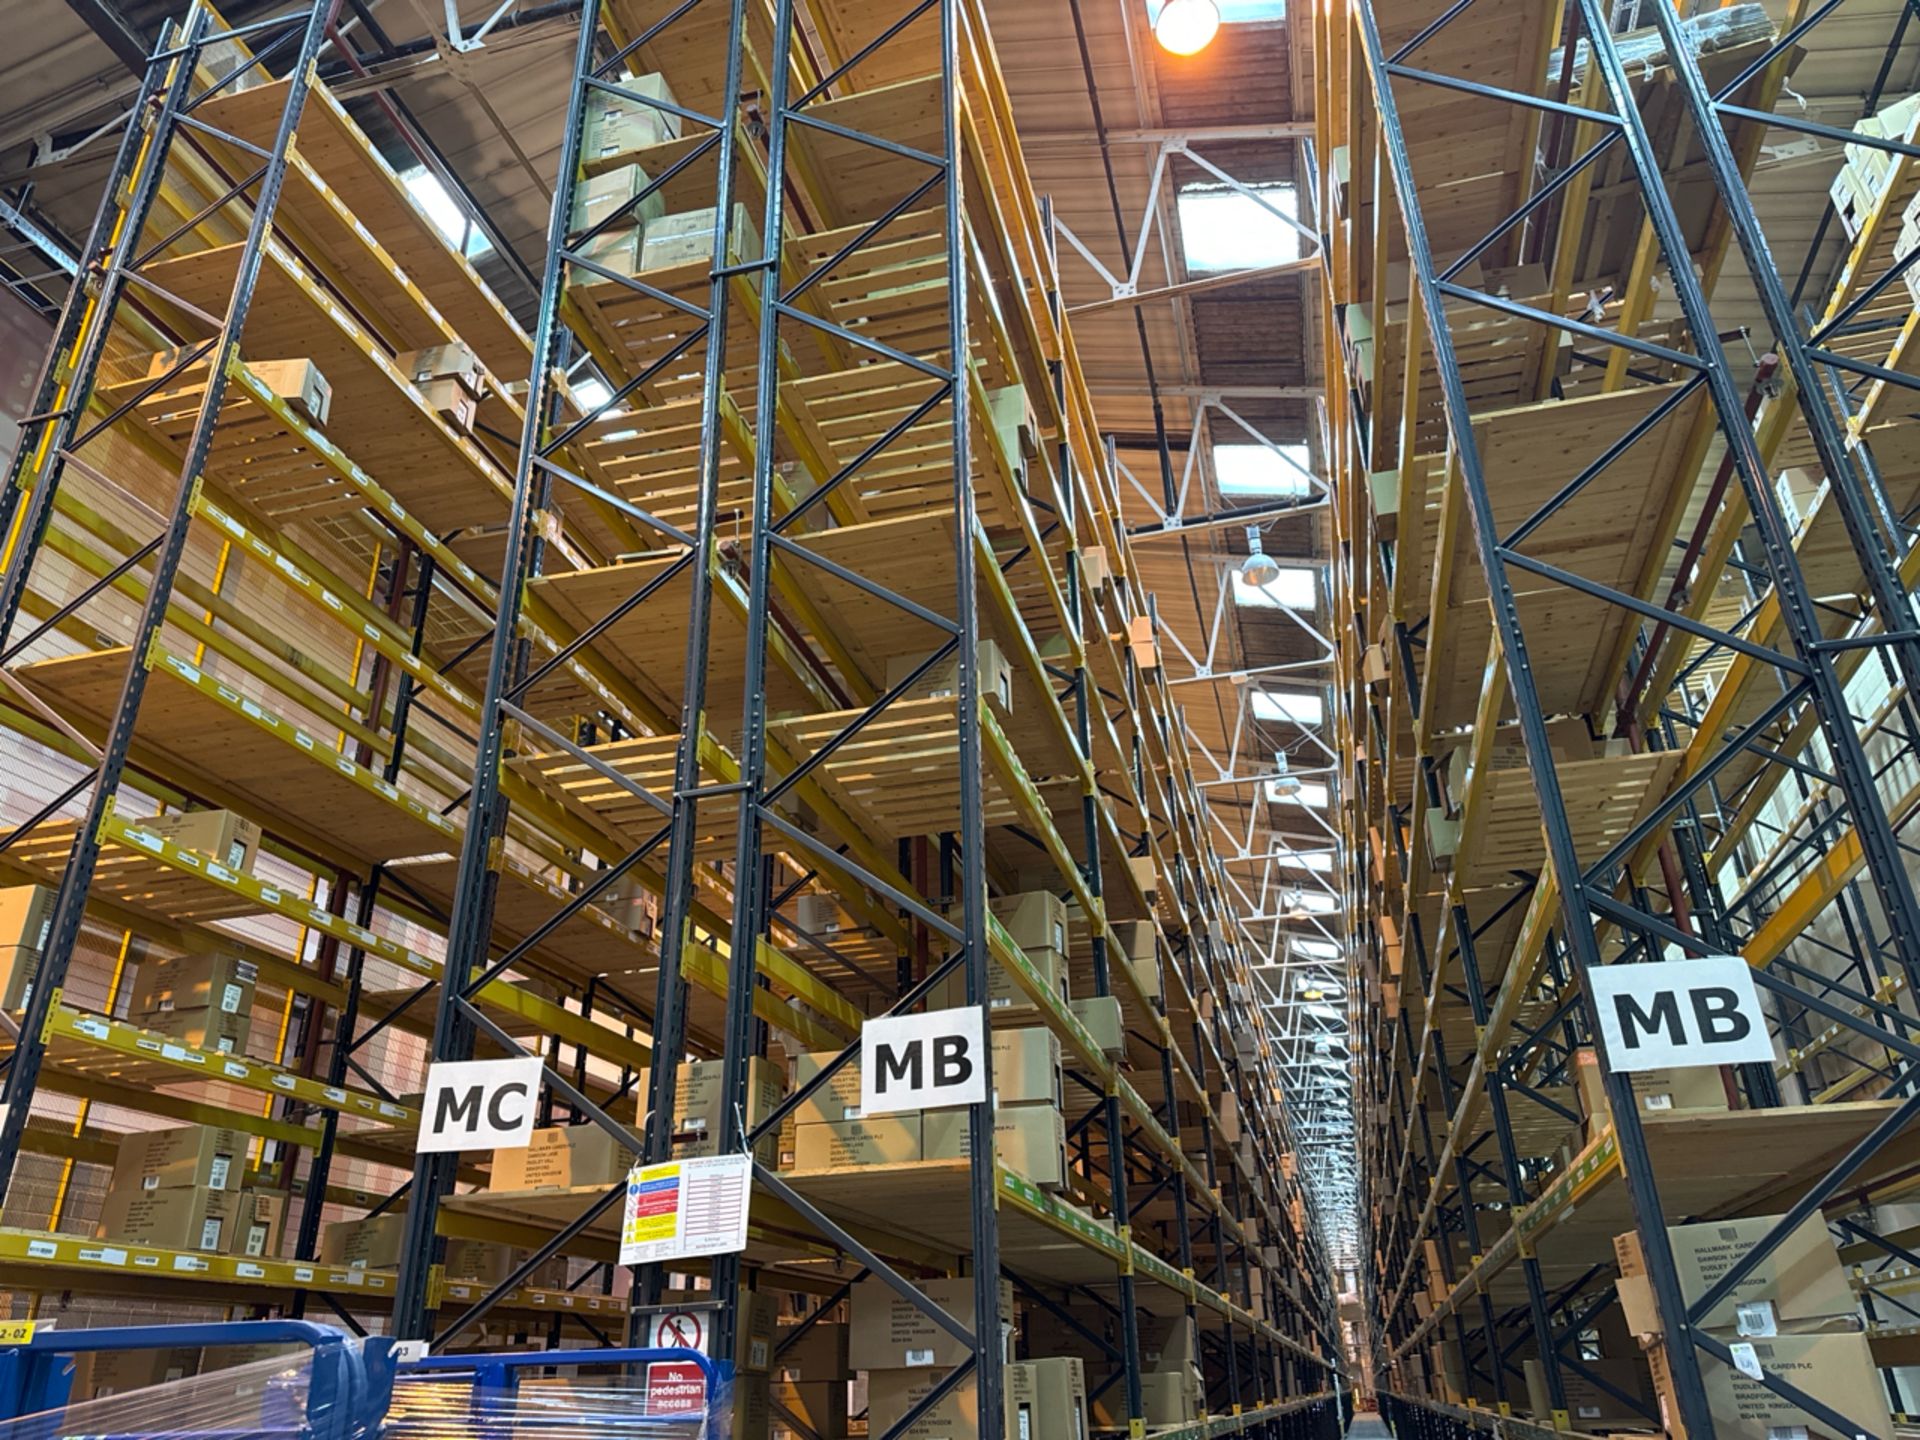 Run Of 36 Bays Of Back To Back Boltless Industrial Pallet Racking